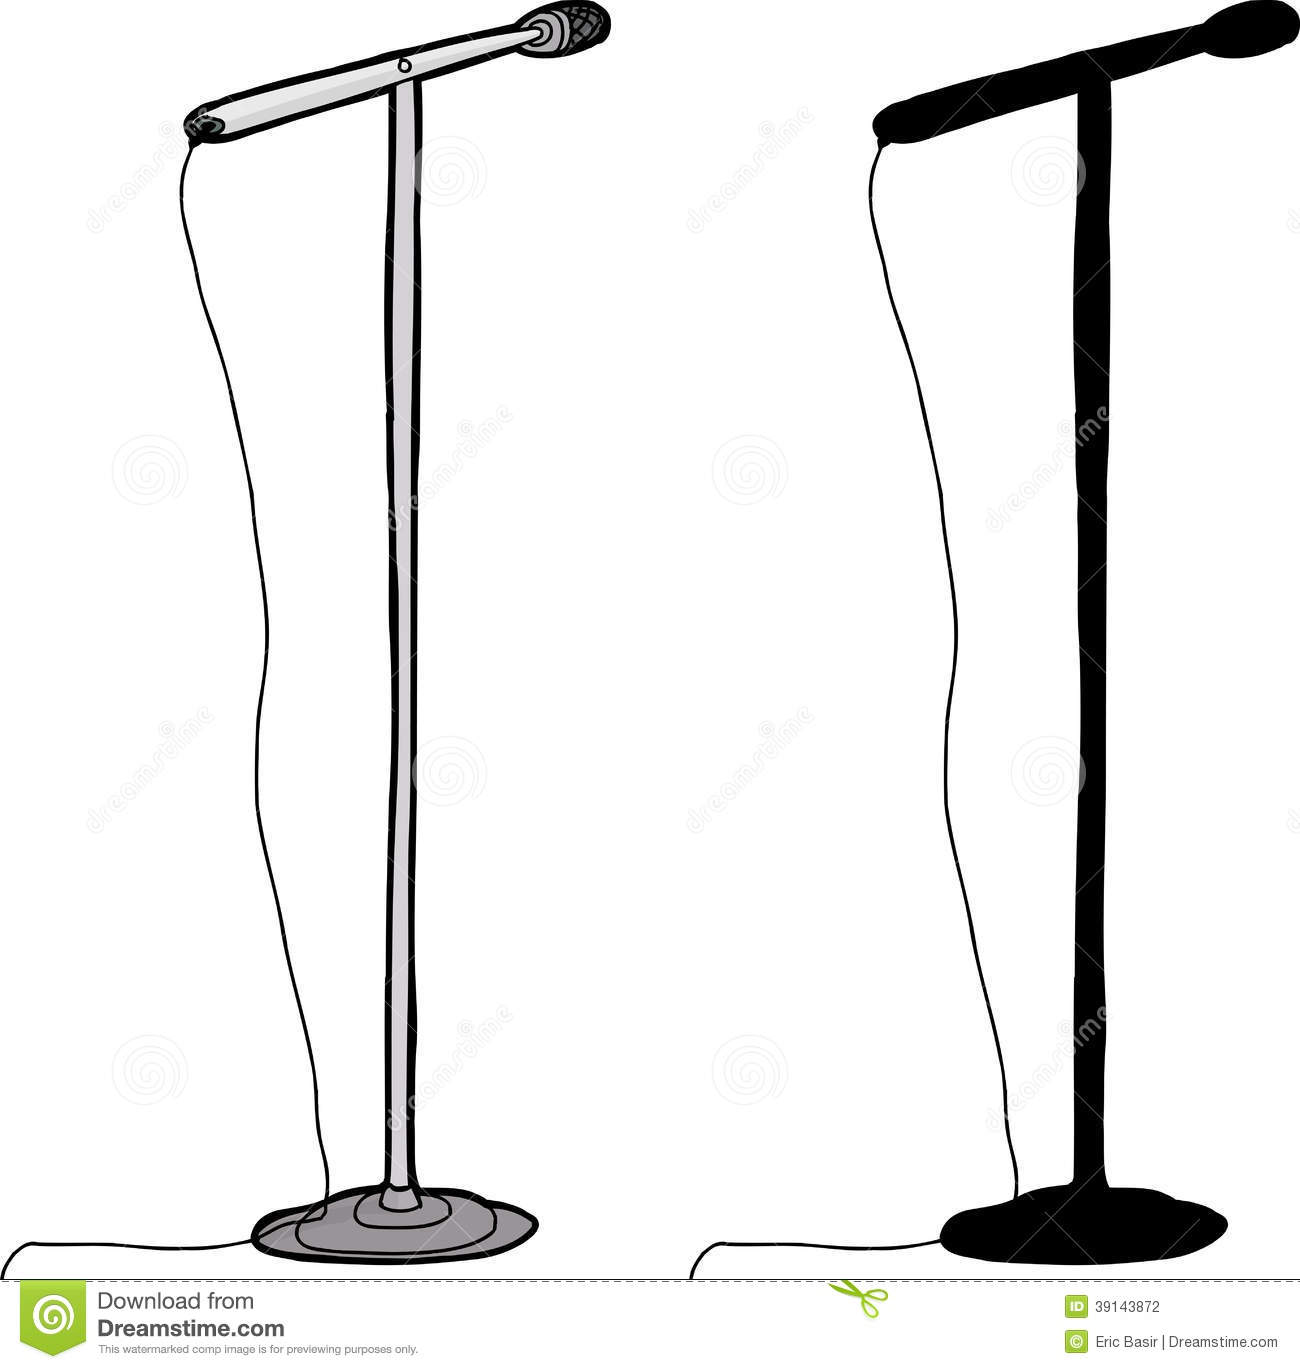 Cartoon And Silhouette Microphone Stand Over White Background